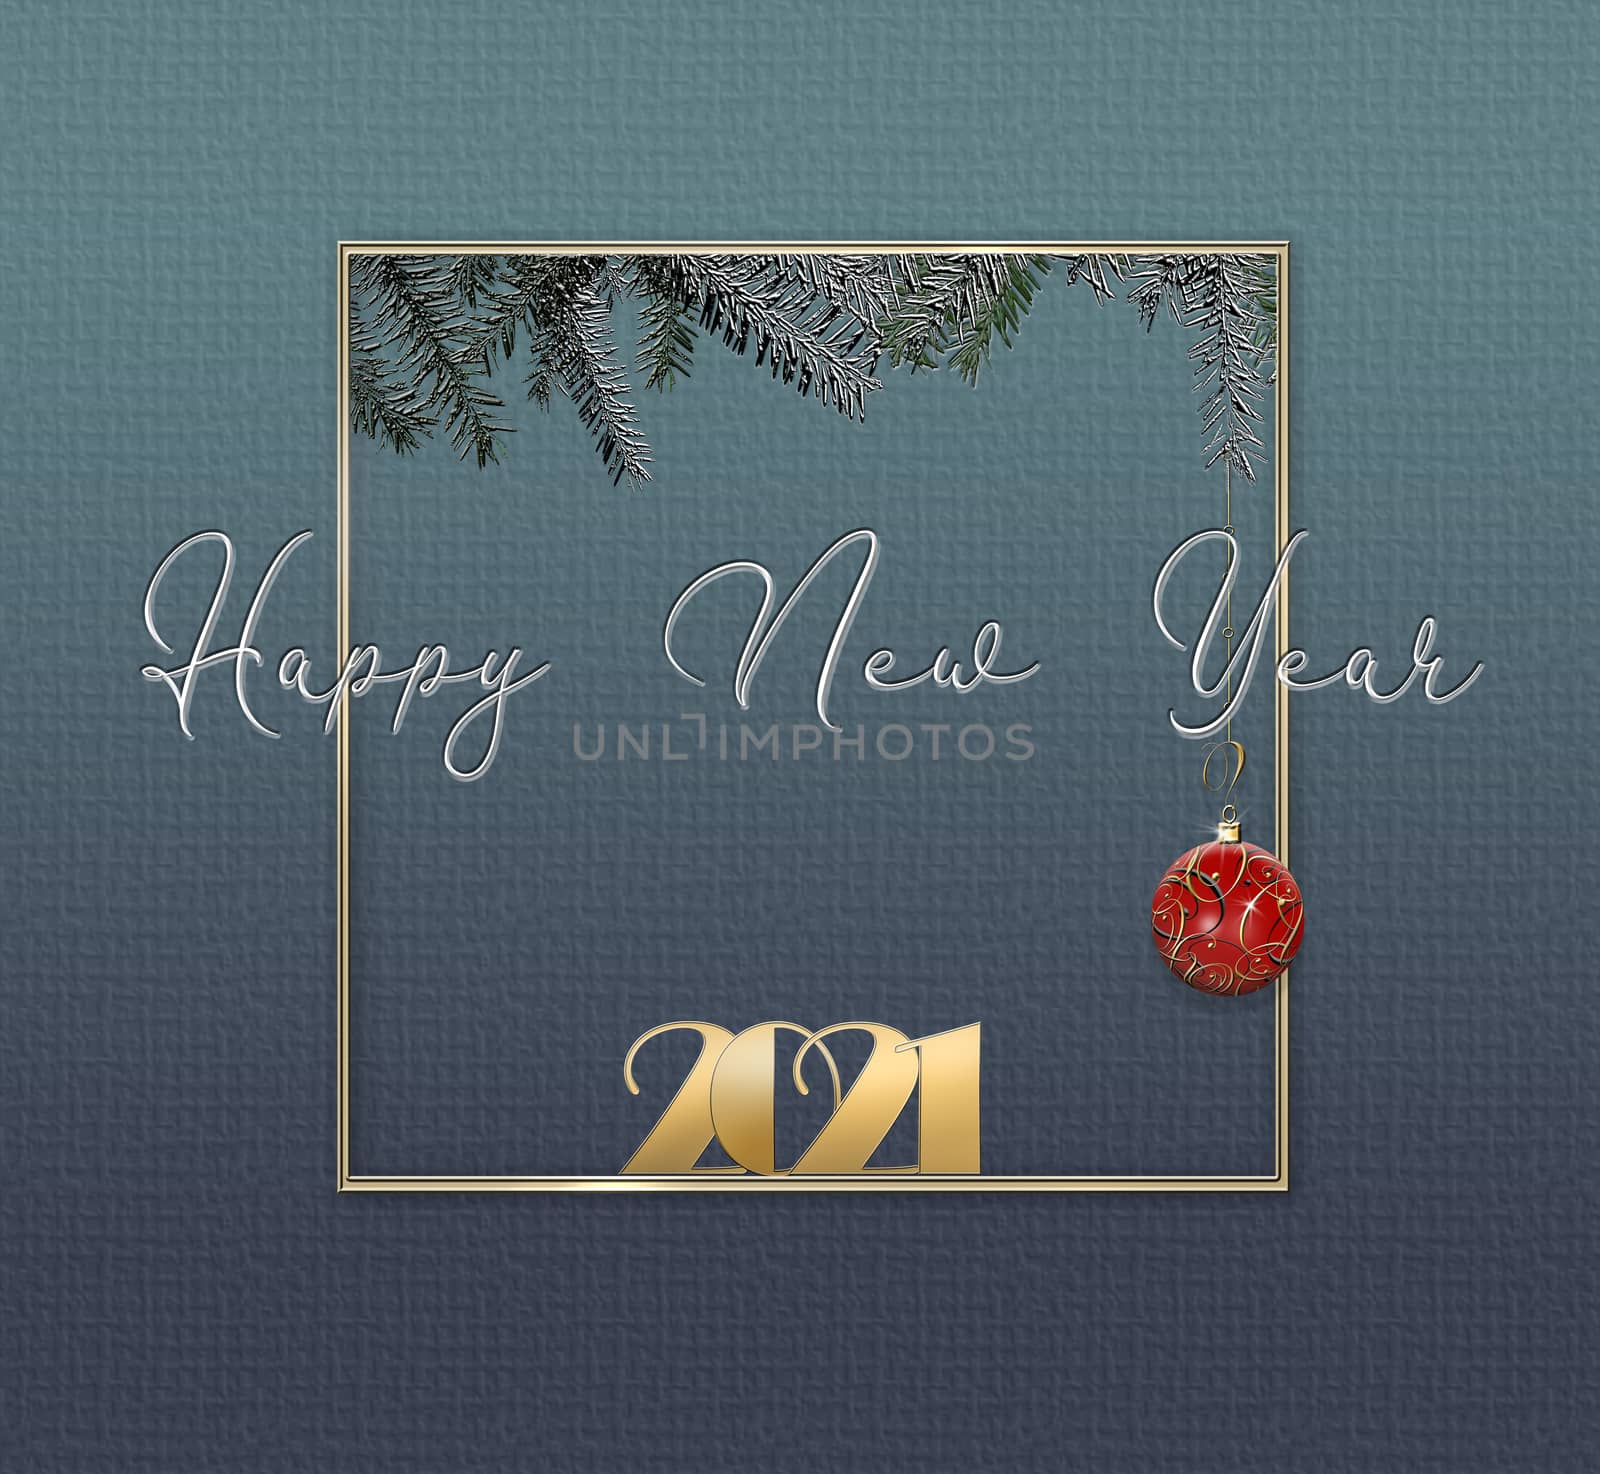 Elegant holiday 2021 New Year party invitation with gold digit 2021, red bauble on blue background with Christmas fir branches. Text Happy New Year. 3D illustration. Place for text. Copy space